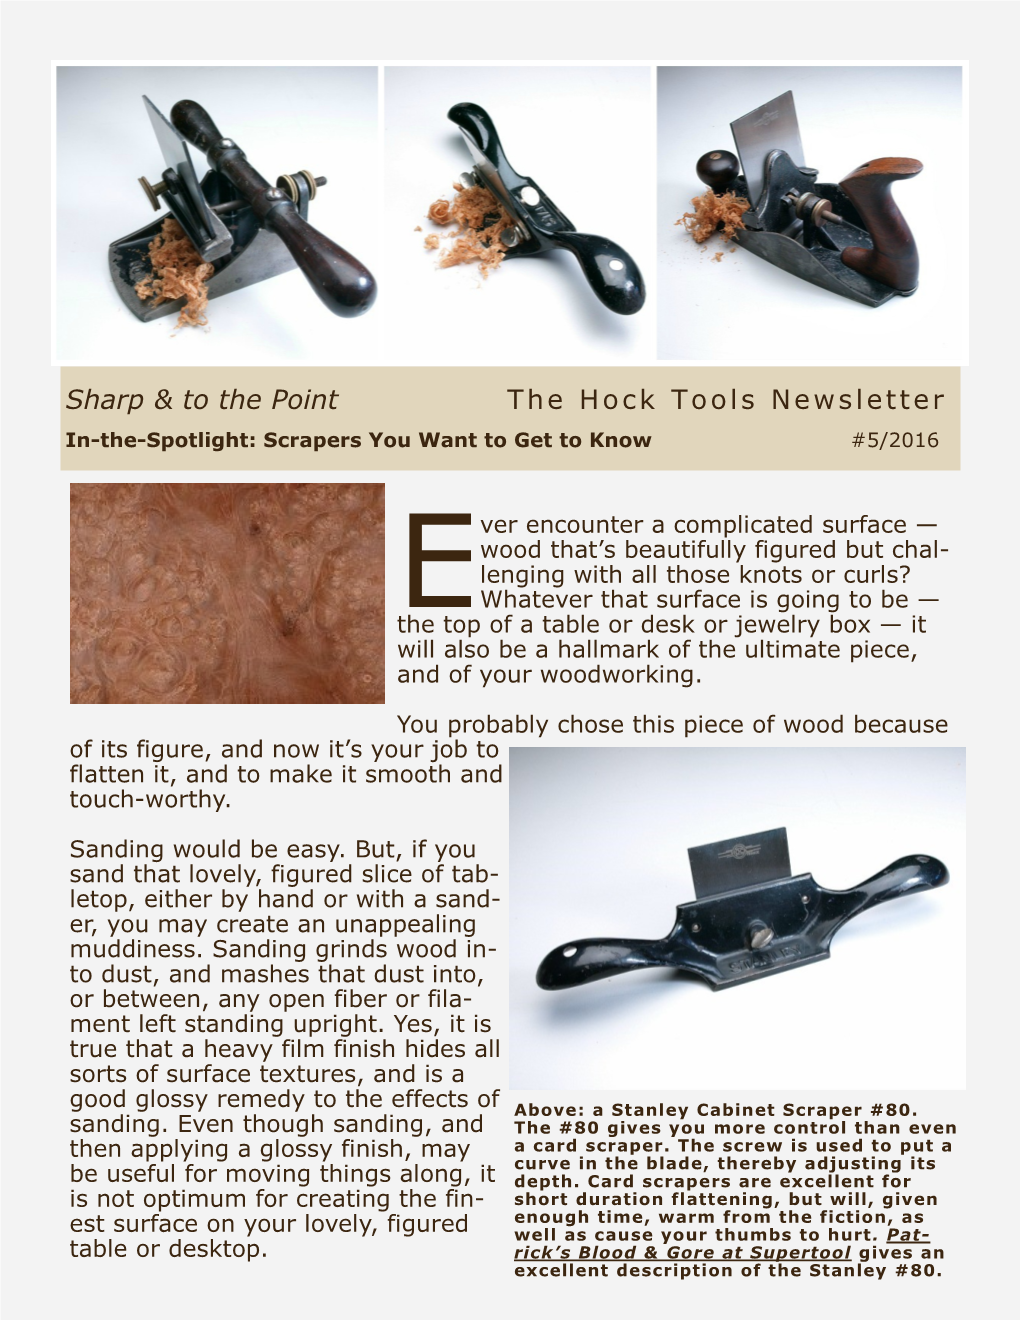 Sharp & to the Point the Hock Tools Newsletter